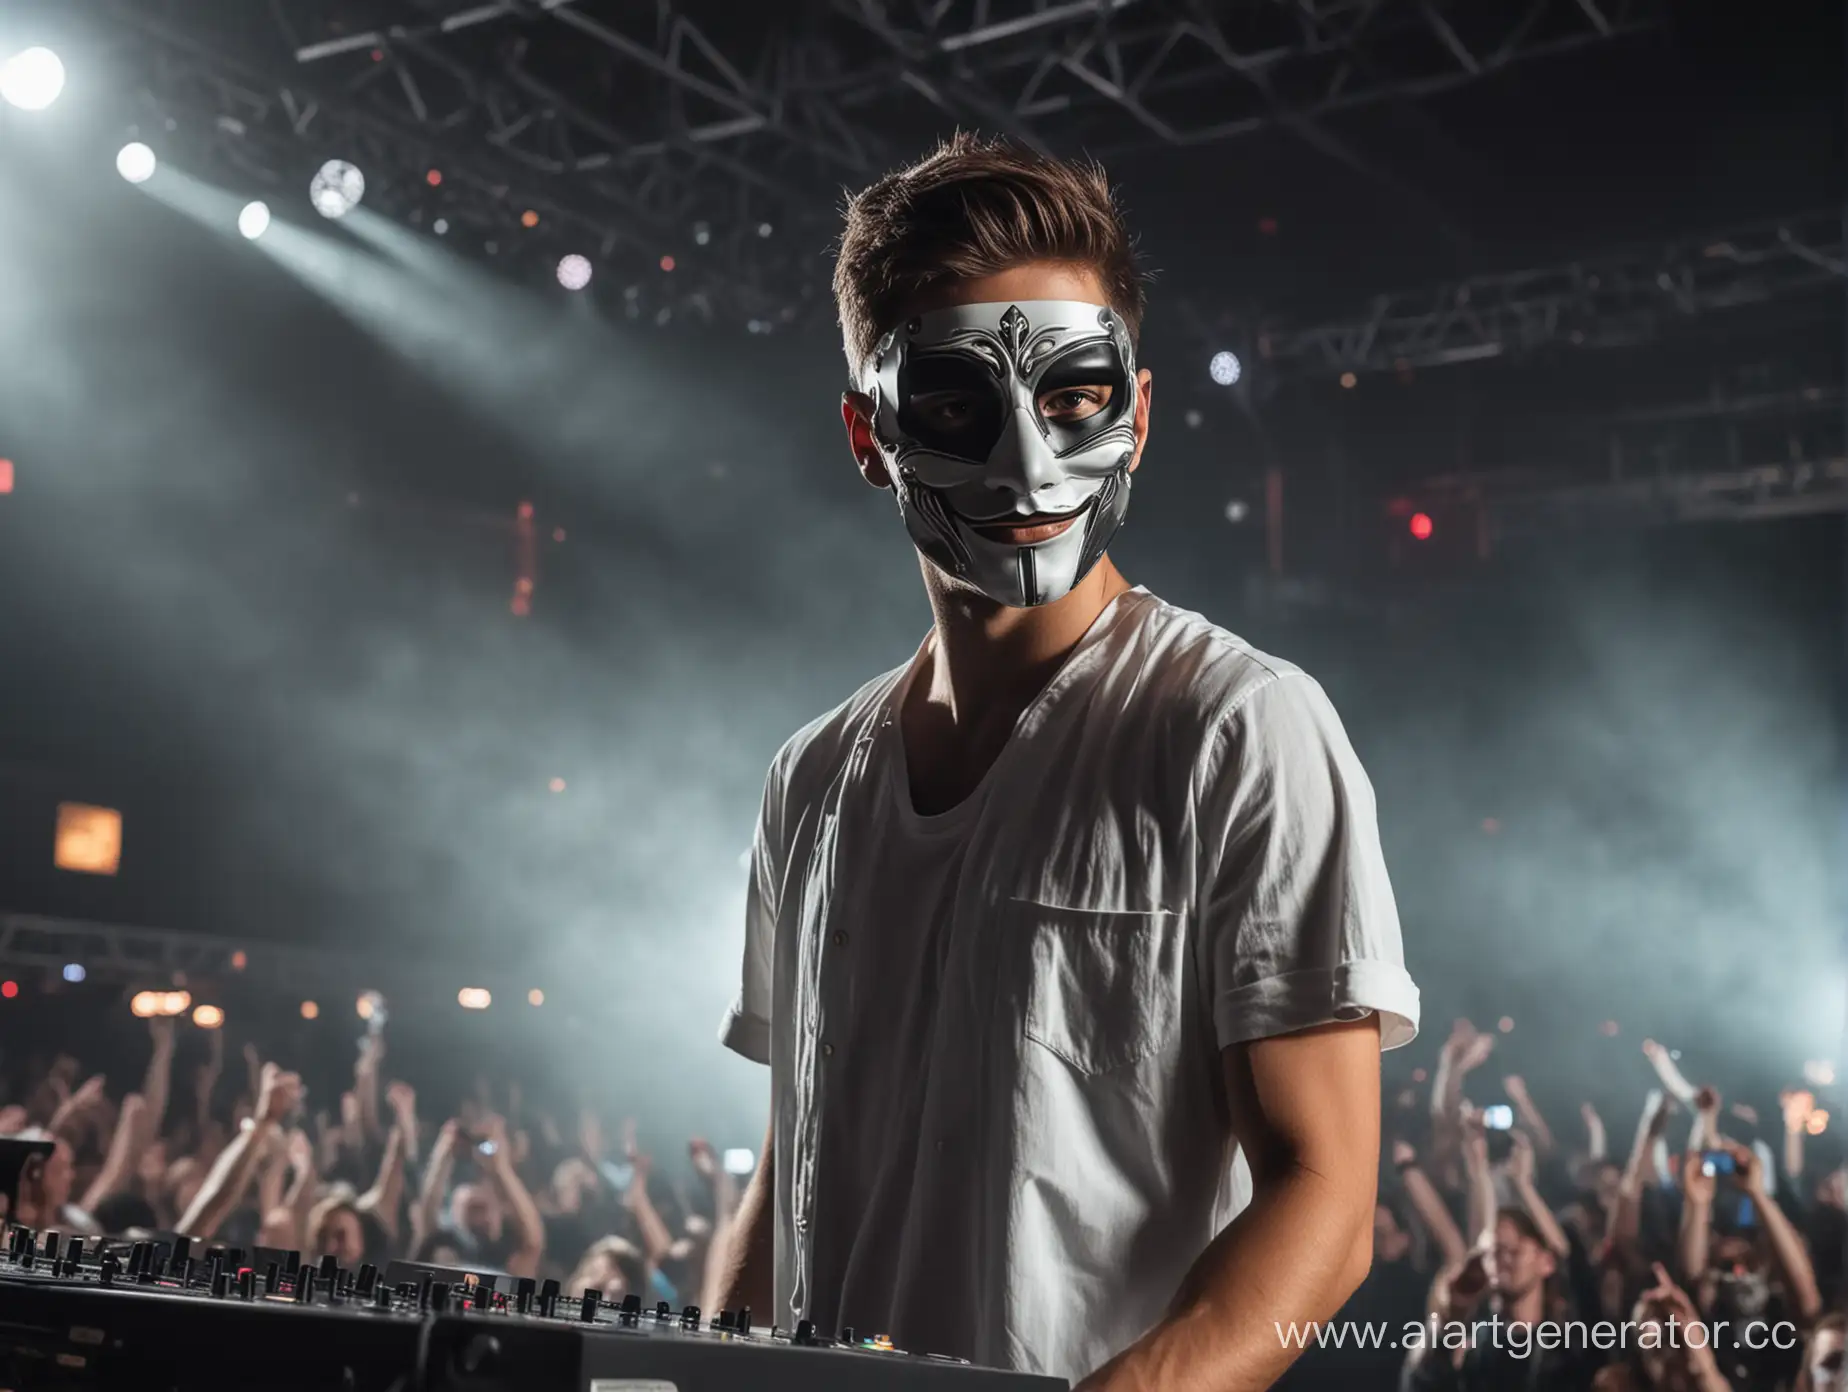 Stylish-Masked-Man-Grooving-at-Concert-with-DJ